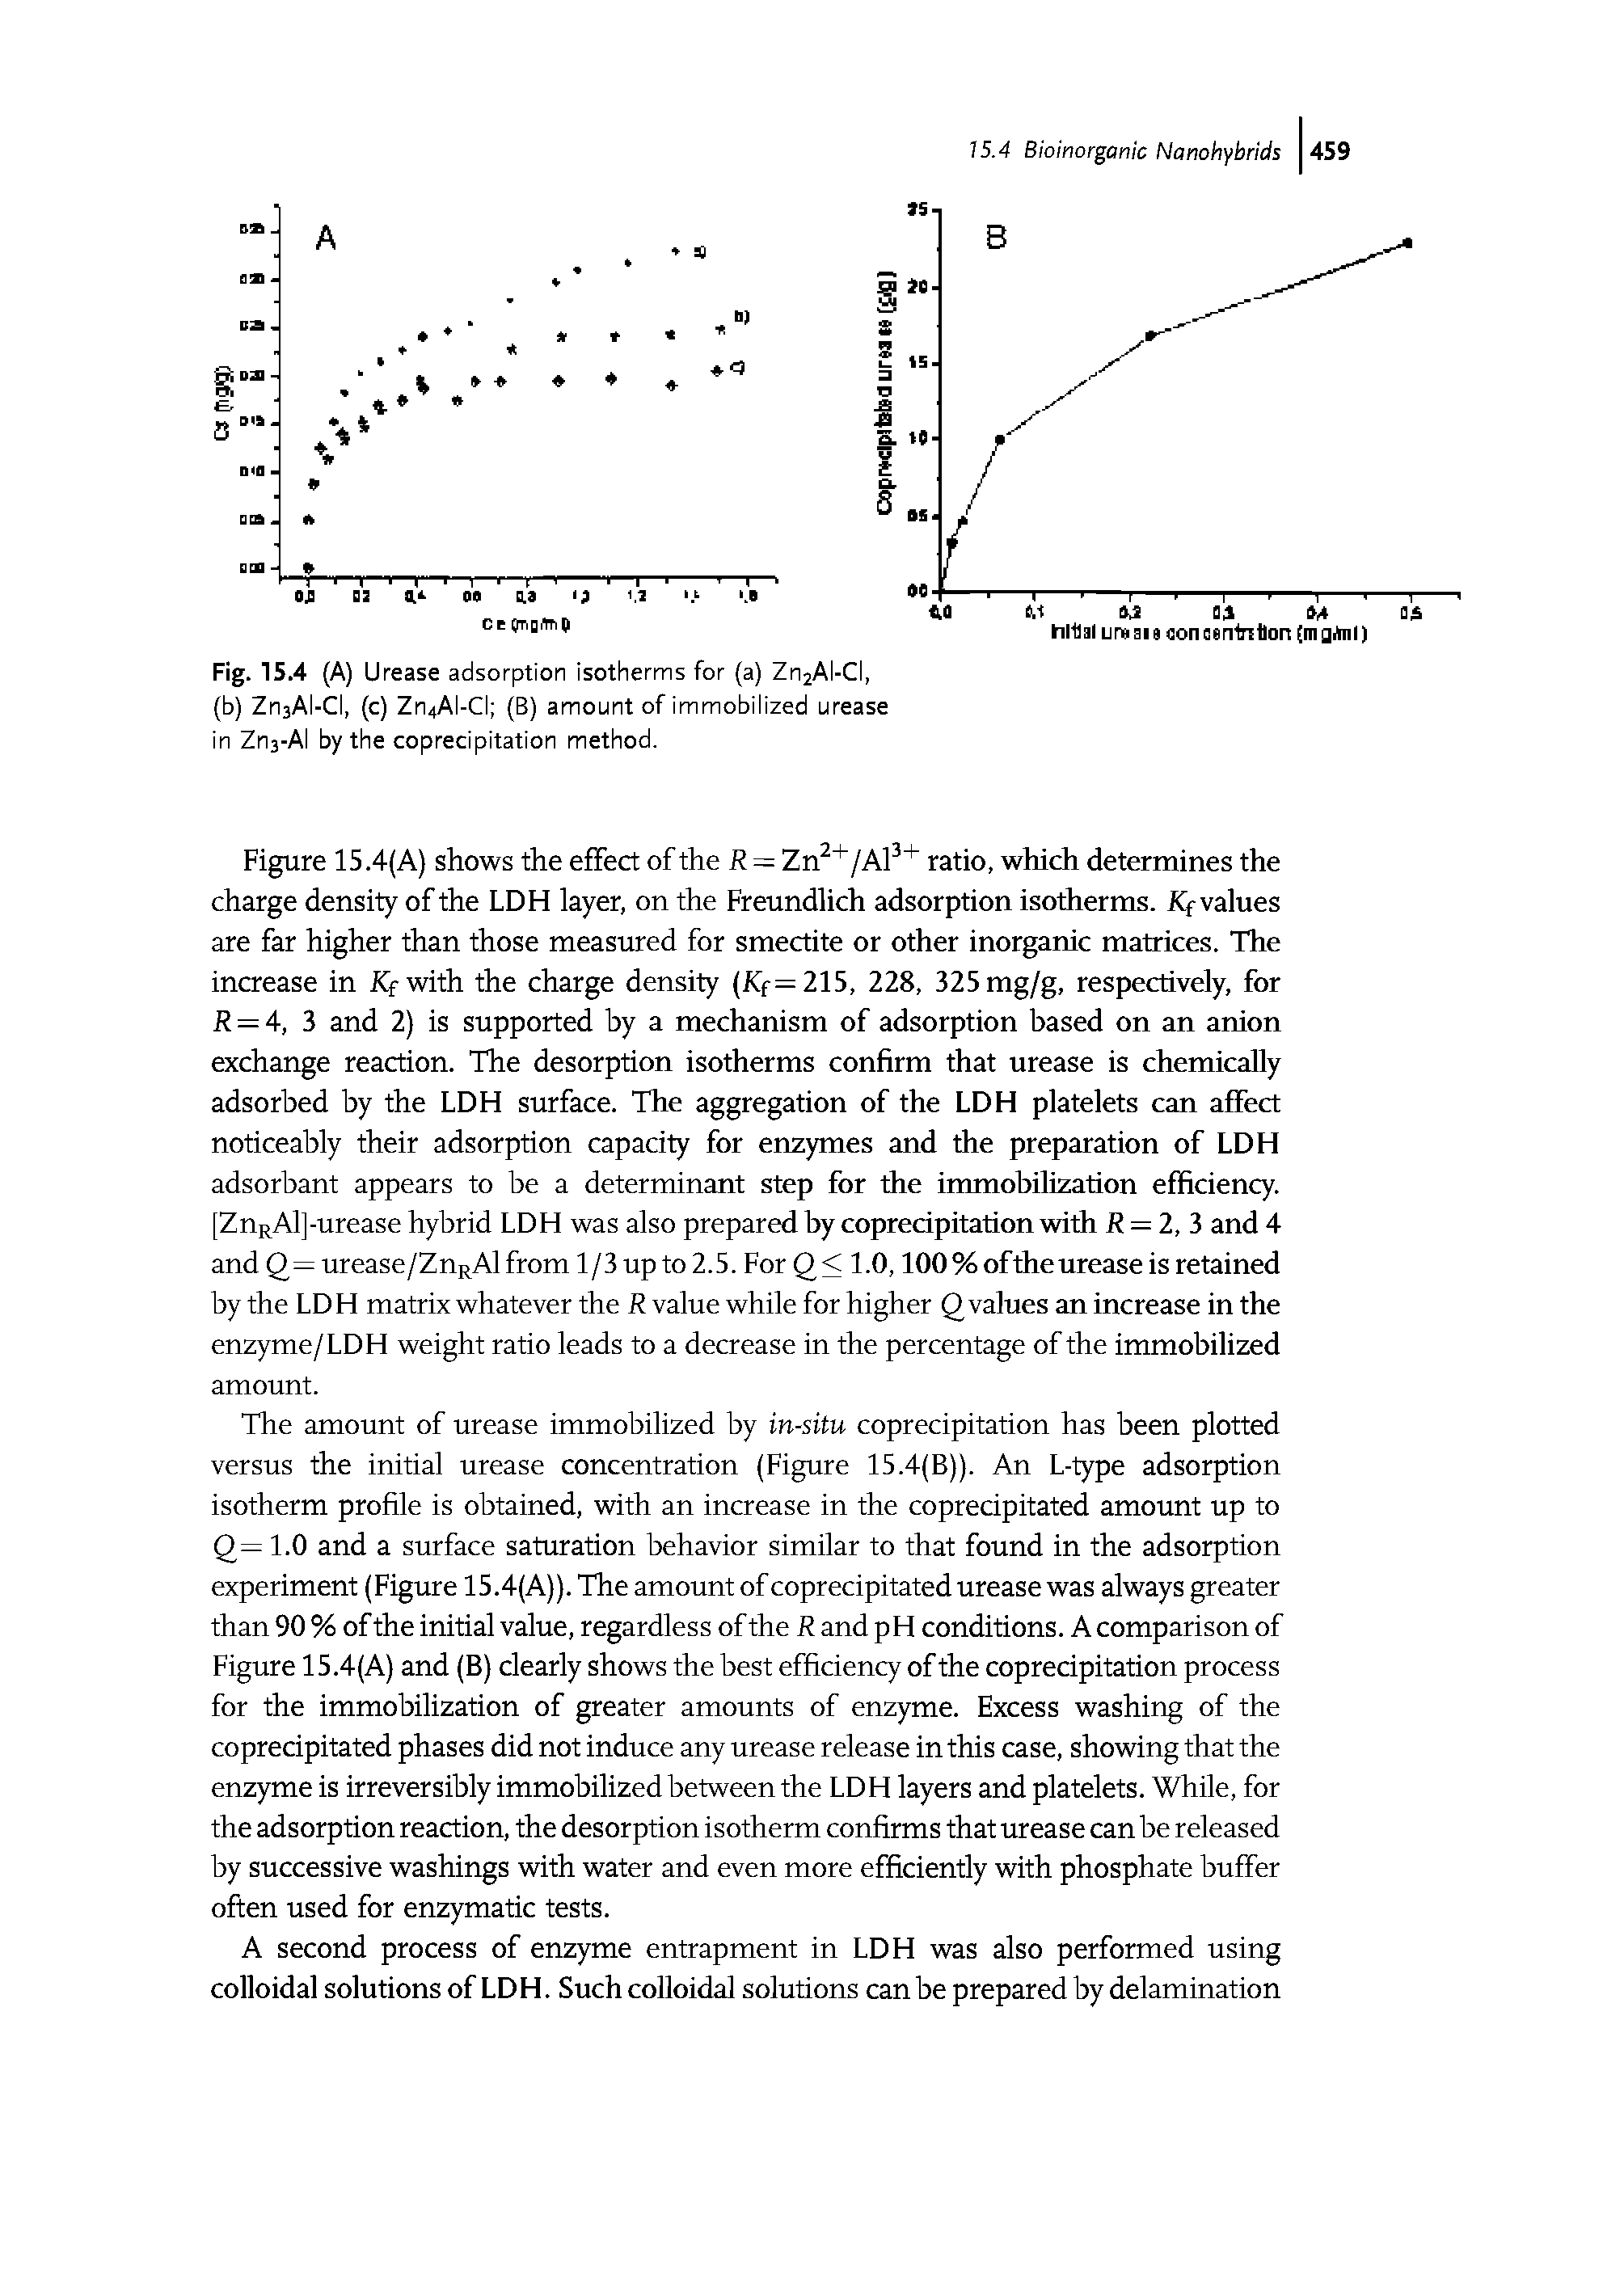 Figure 15.4(A) shows the effect of the R = Zn2+/Al3+ ratio, which determines the charge density of the LDH layer, on the Freundlich adsorption isotherms. K values are far higher than those measured for smectite or other inorganic matrices. The increase in Kf with the charge density (Kf= 215, 228, 325mg/g, respectively, for R = 4, 3 and 2) is supported by a mechanism of adsorption based on an anion exchange reaction. The desorption isotherms confirm that urease is chemically adsorbed by the LDH surface. The aggregation of the LDH platelets can affect noticeably their adsorption capacity for enzymes and the preparation of LDH adsorbant appears to be a determinant step for the immobilization efficiency. [ZnRAl]-urease hybrid LDH was also prepared by coprecipitation with R = 2, 3 and 4 and Q= urease/ZnRAl from 1 /3 up to 2.5. For Q < 1.0,100 % of the urease is retained by the LDH matrix whatever the R value while for higher Q values an increase in the enzyme/LDH weight ratio leads to a decrease in the percentage of the immobilized amount.